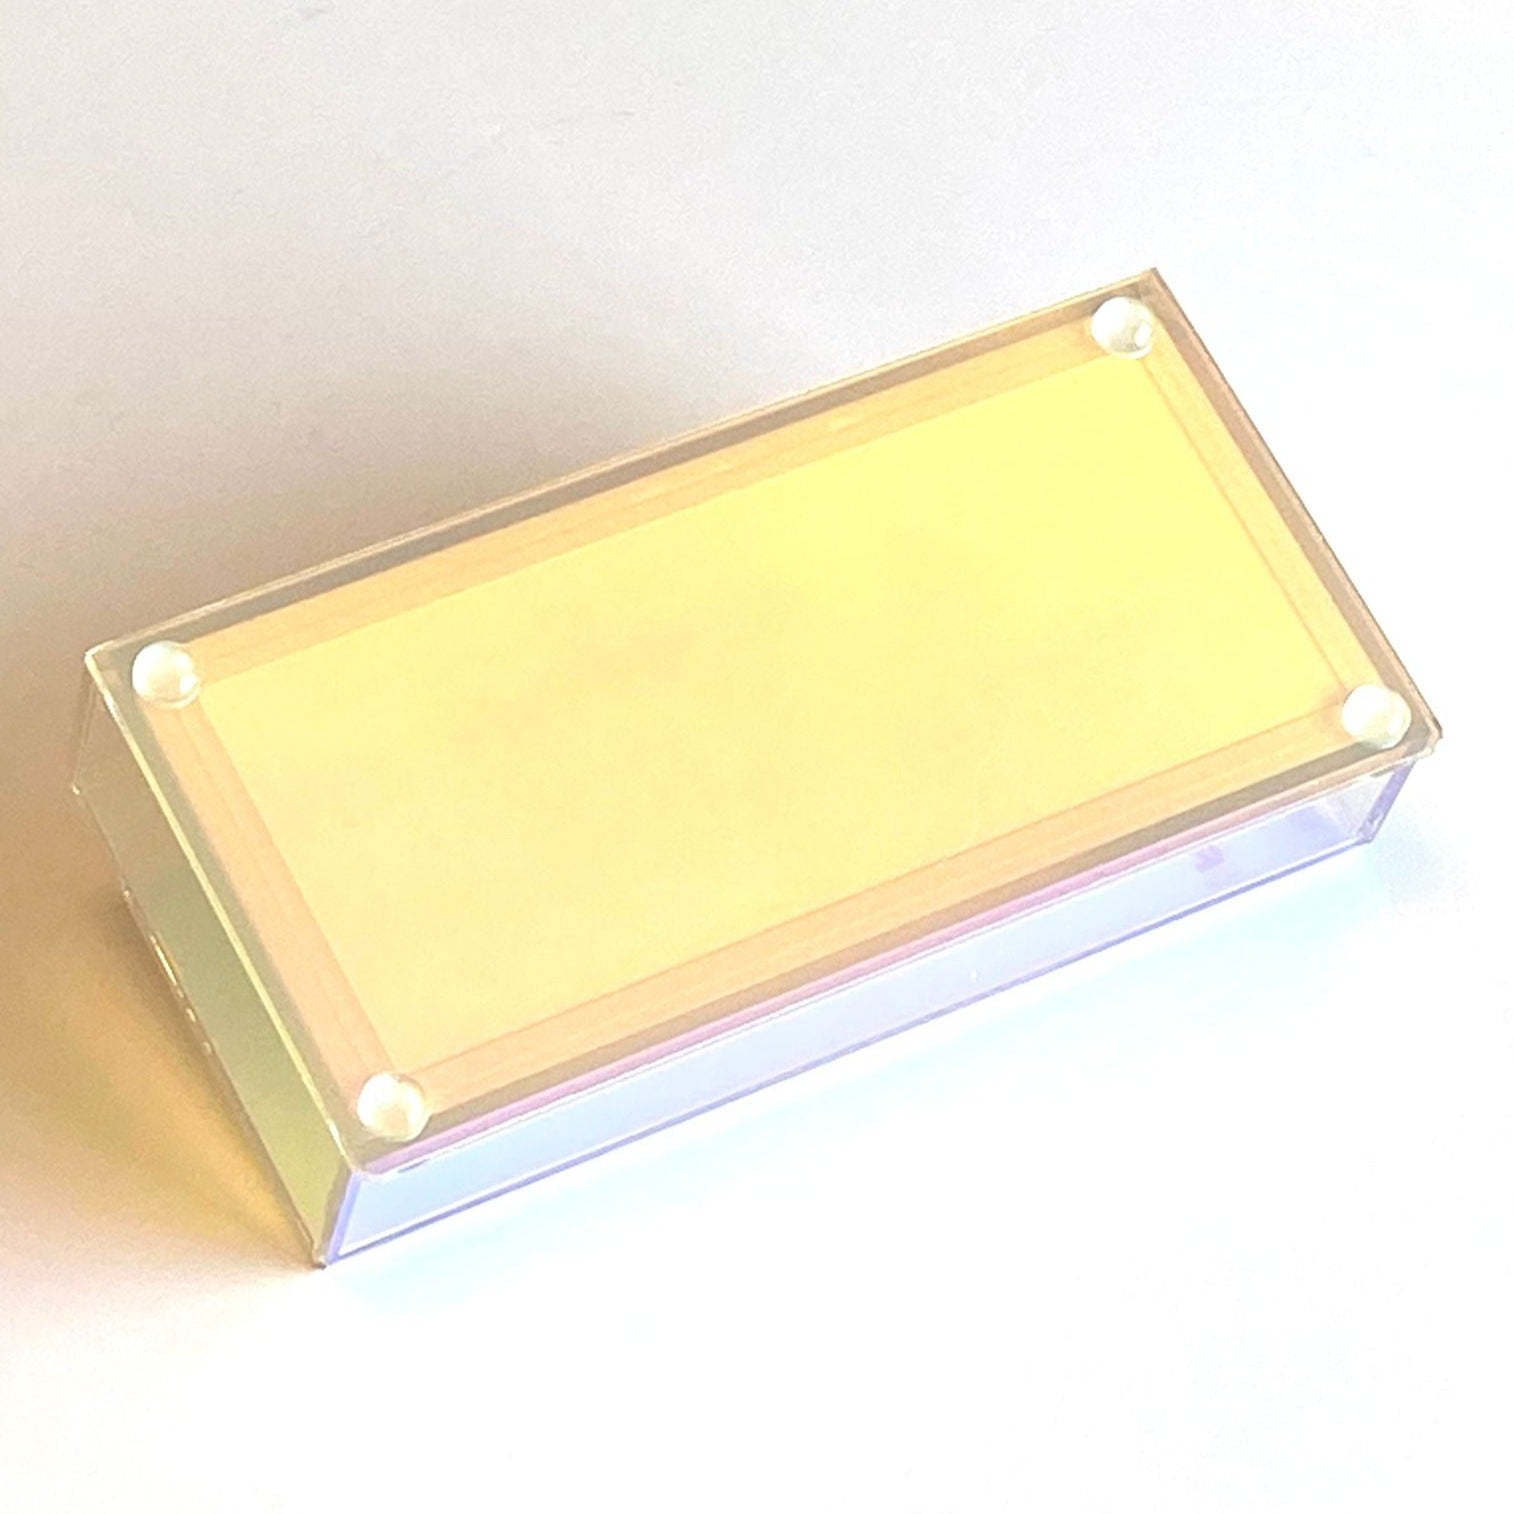 White Lash Tile with Mirrored Pearlescent Storage Case